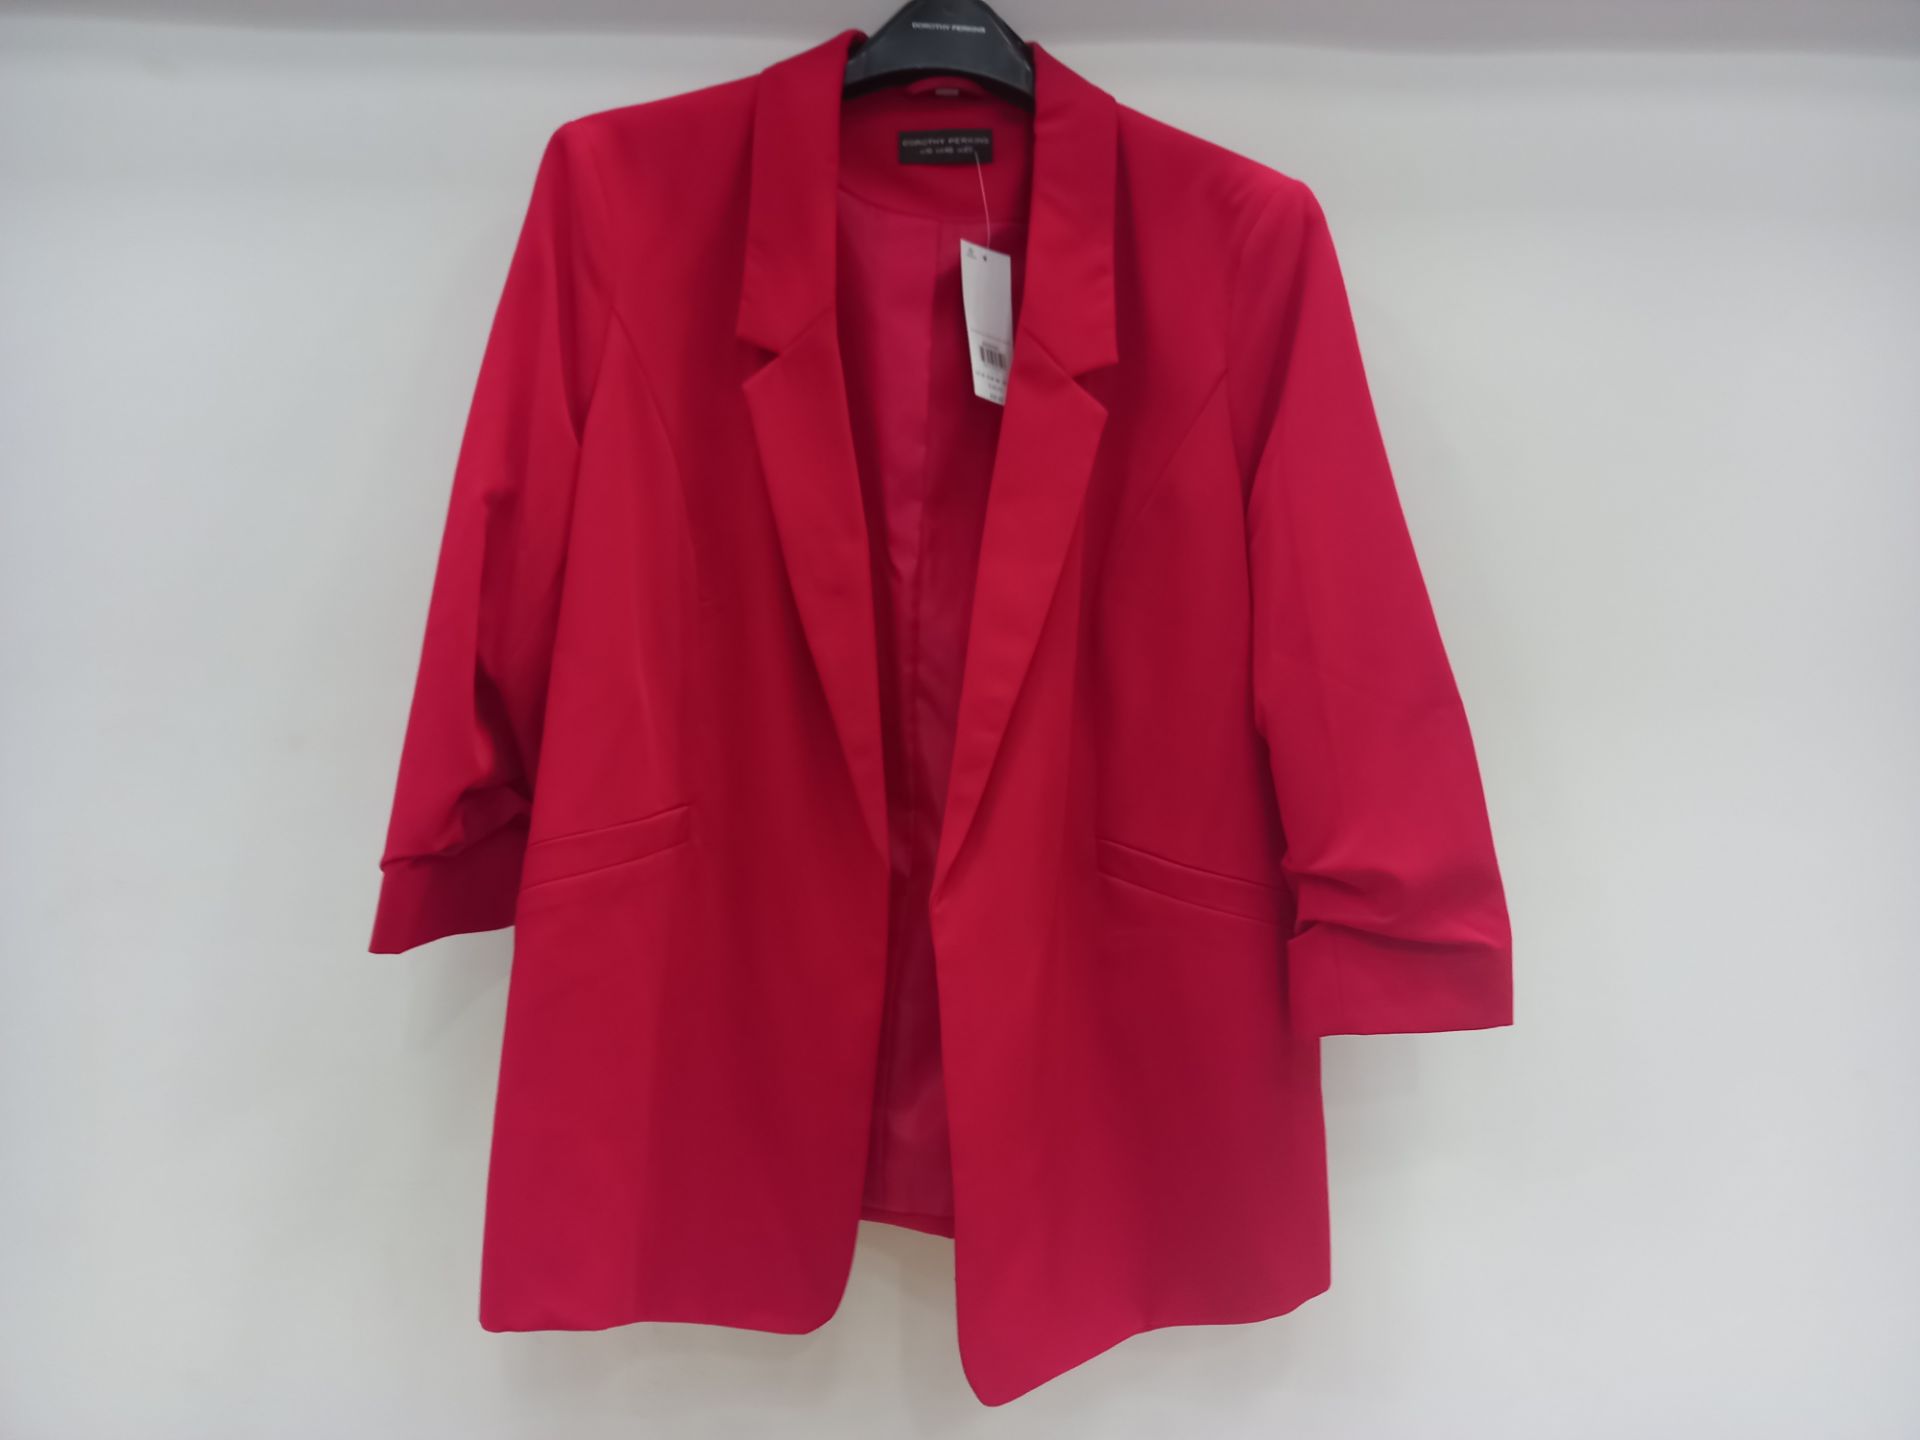 10 X BRAND NEW DOROTHY PERKINS WOMENS RED BLAZERS IN SIZES 14, 16, 20 AND 22 RRP £35.00 (TOTAL RRP